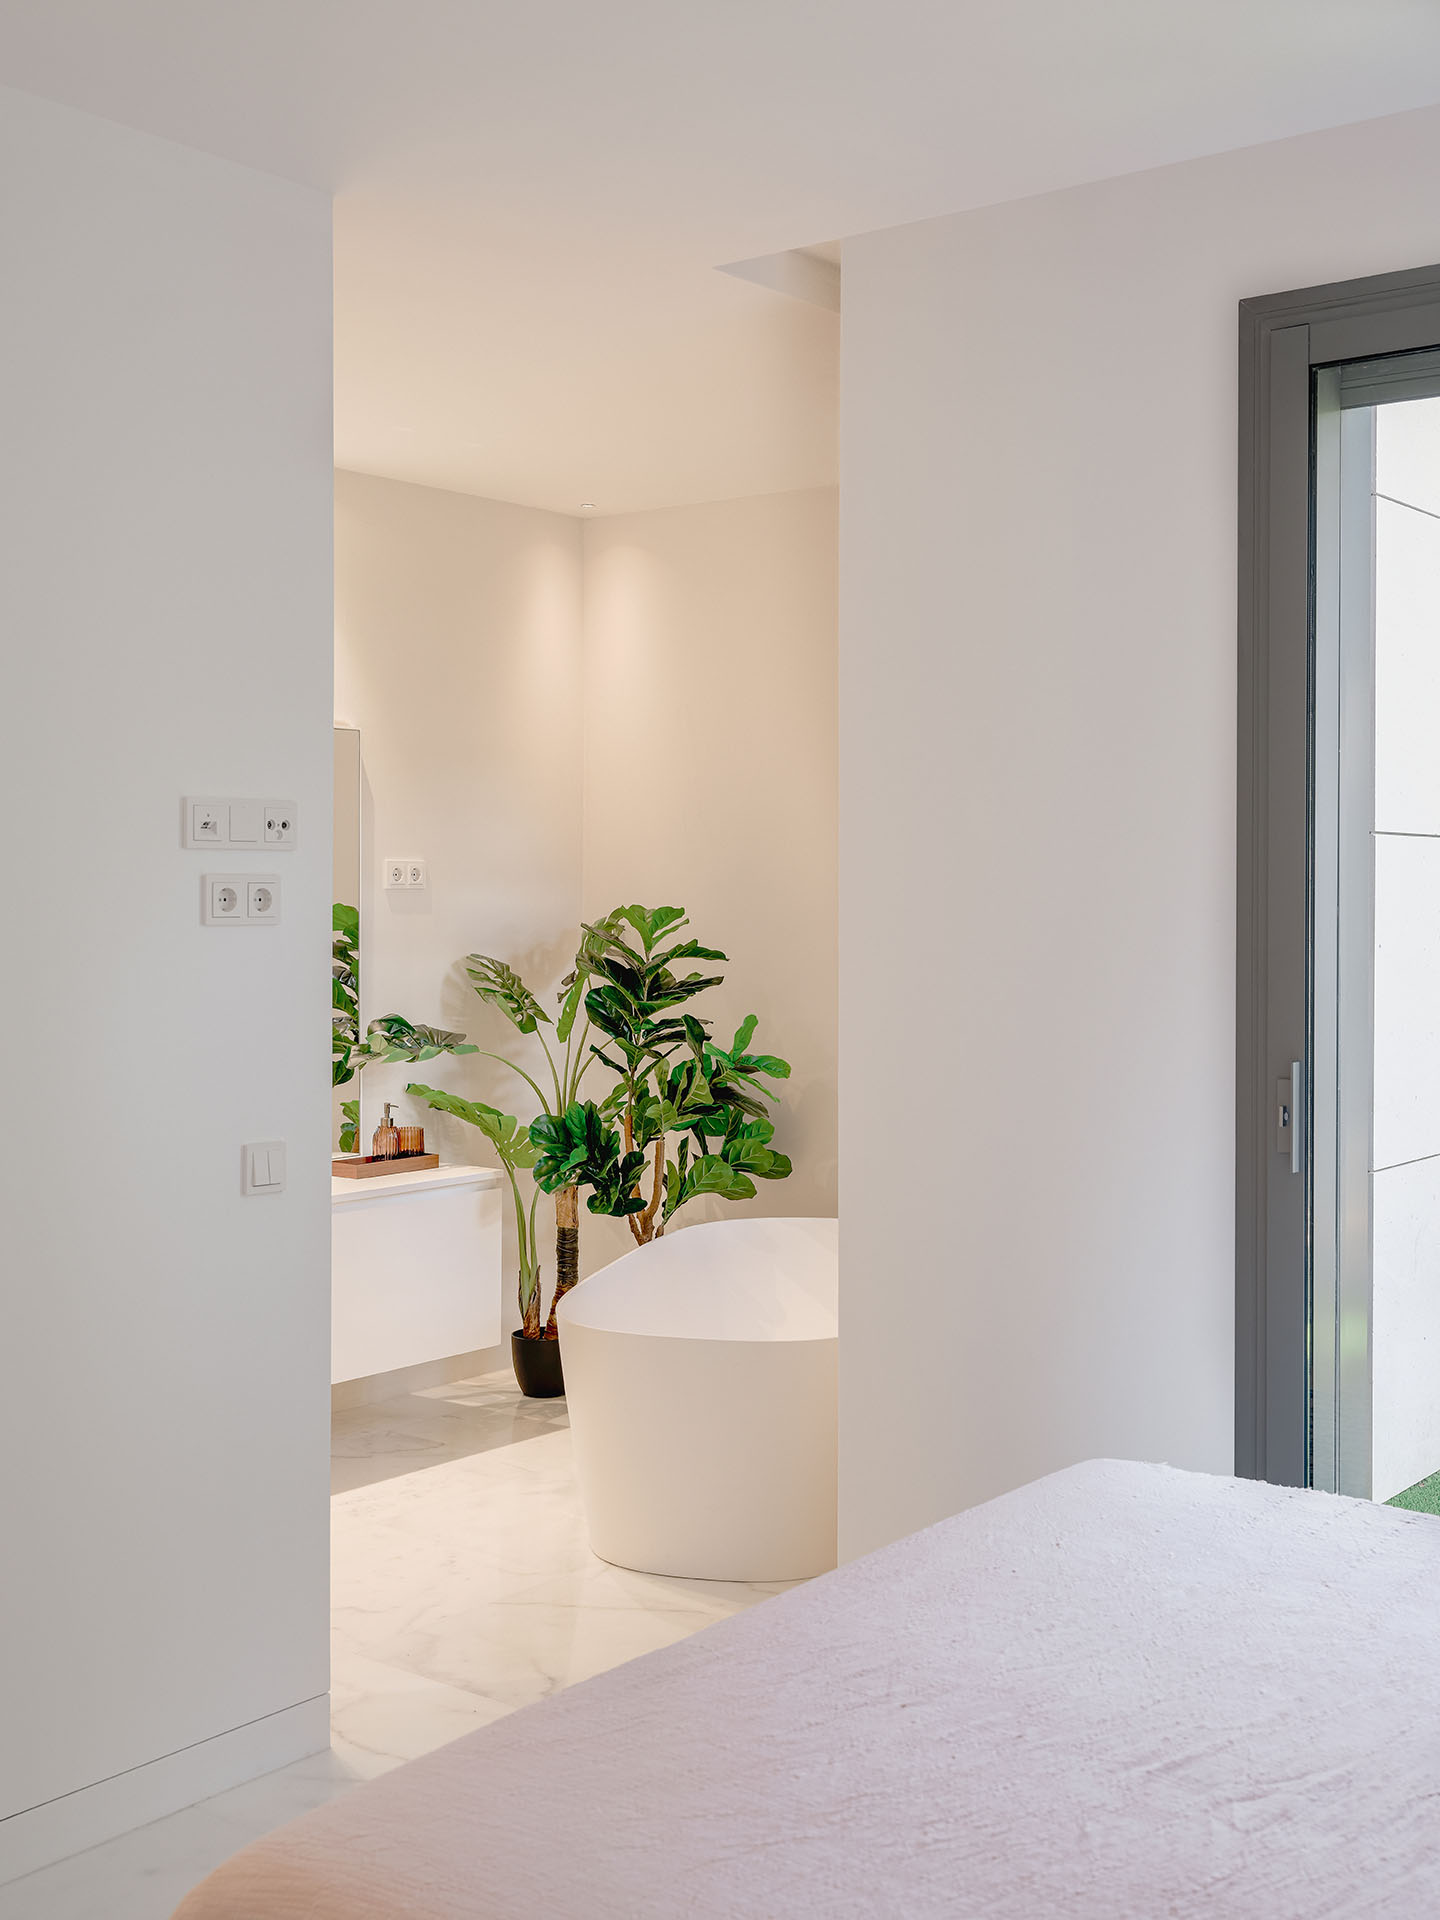 A fully independent space The separate bathroom and the private dressing room are two singular elements of this totally independent space.More